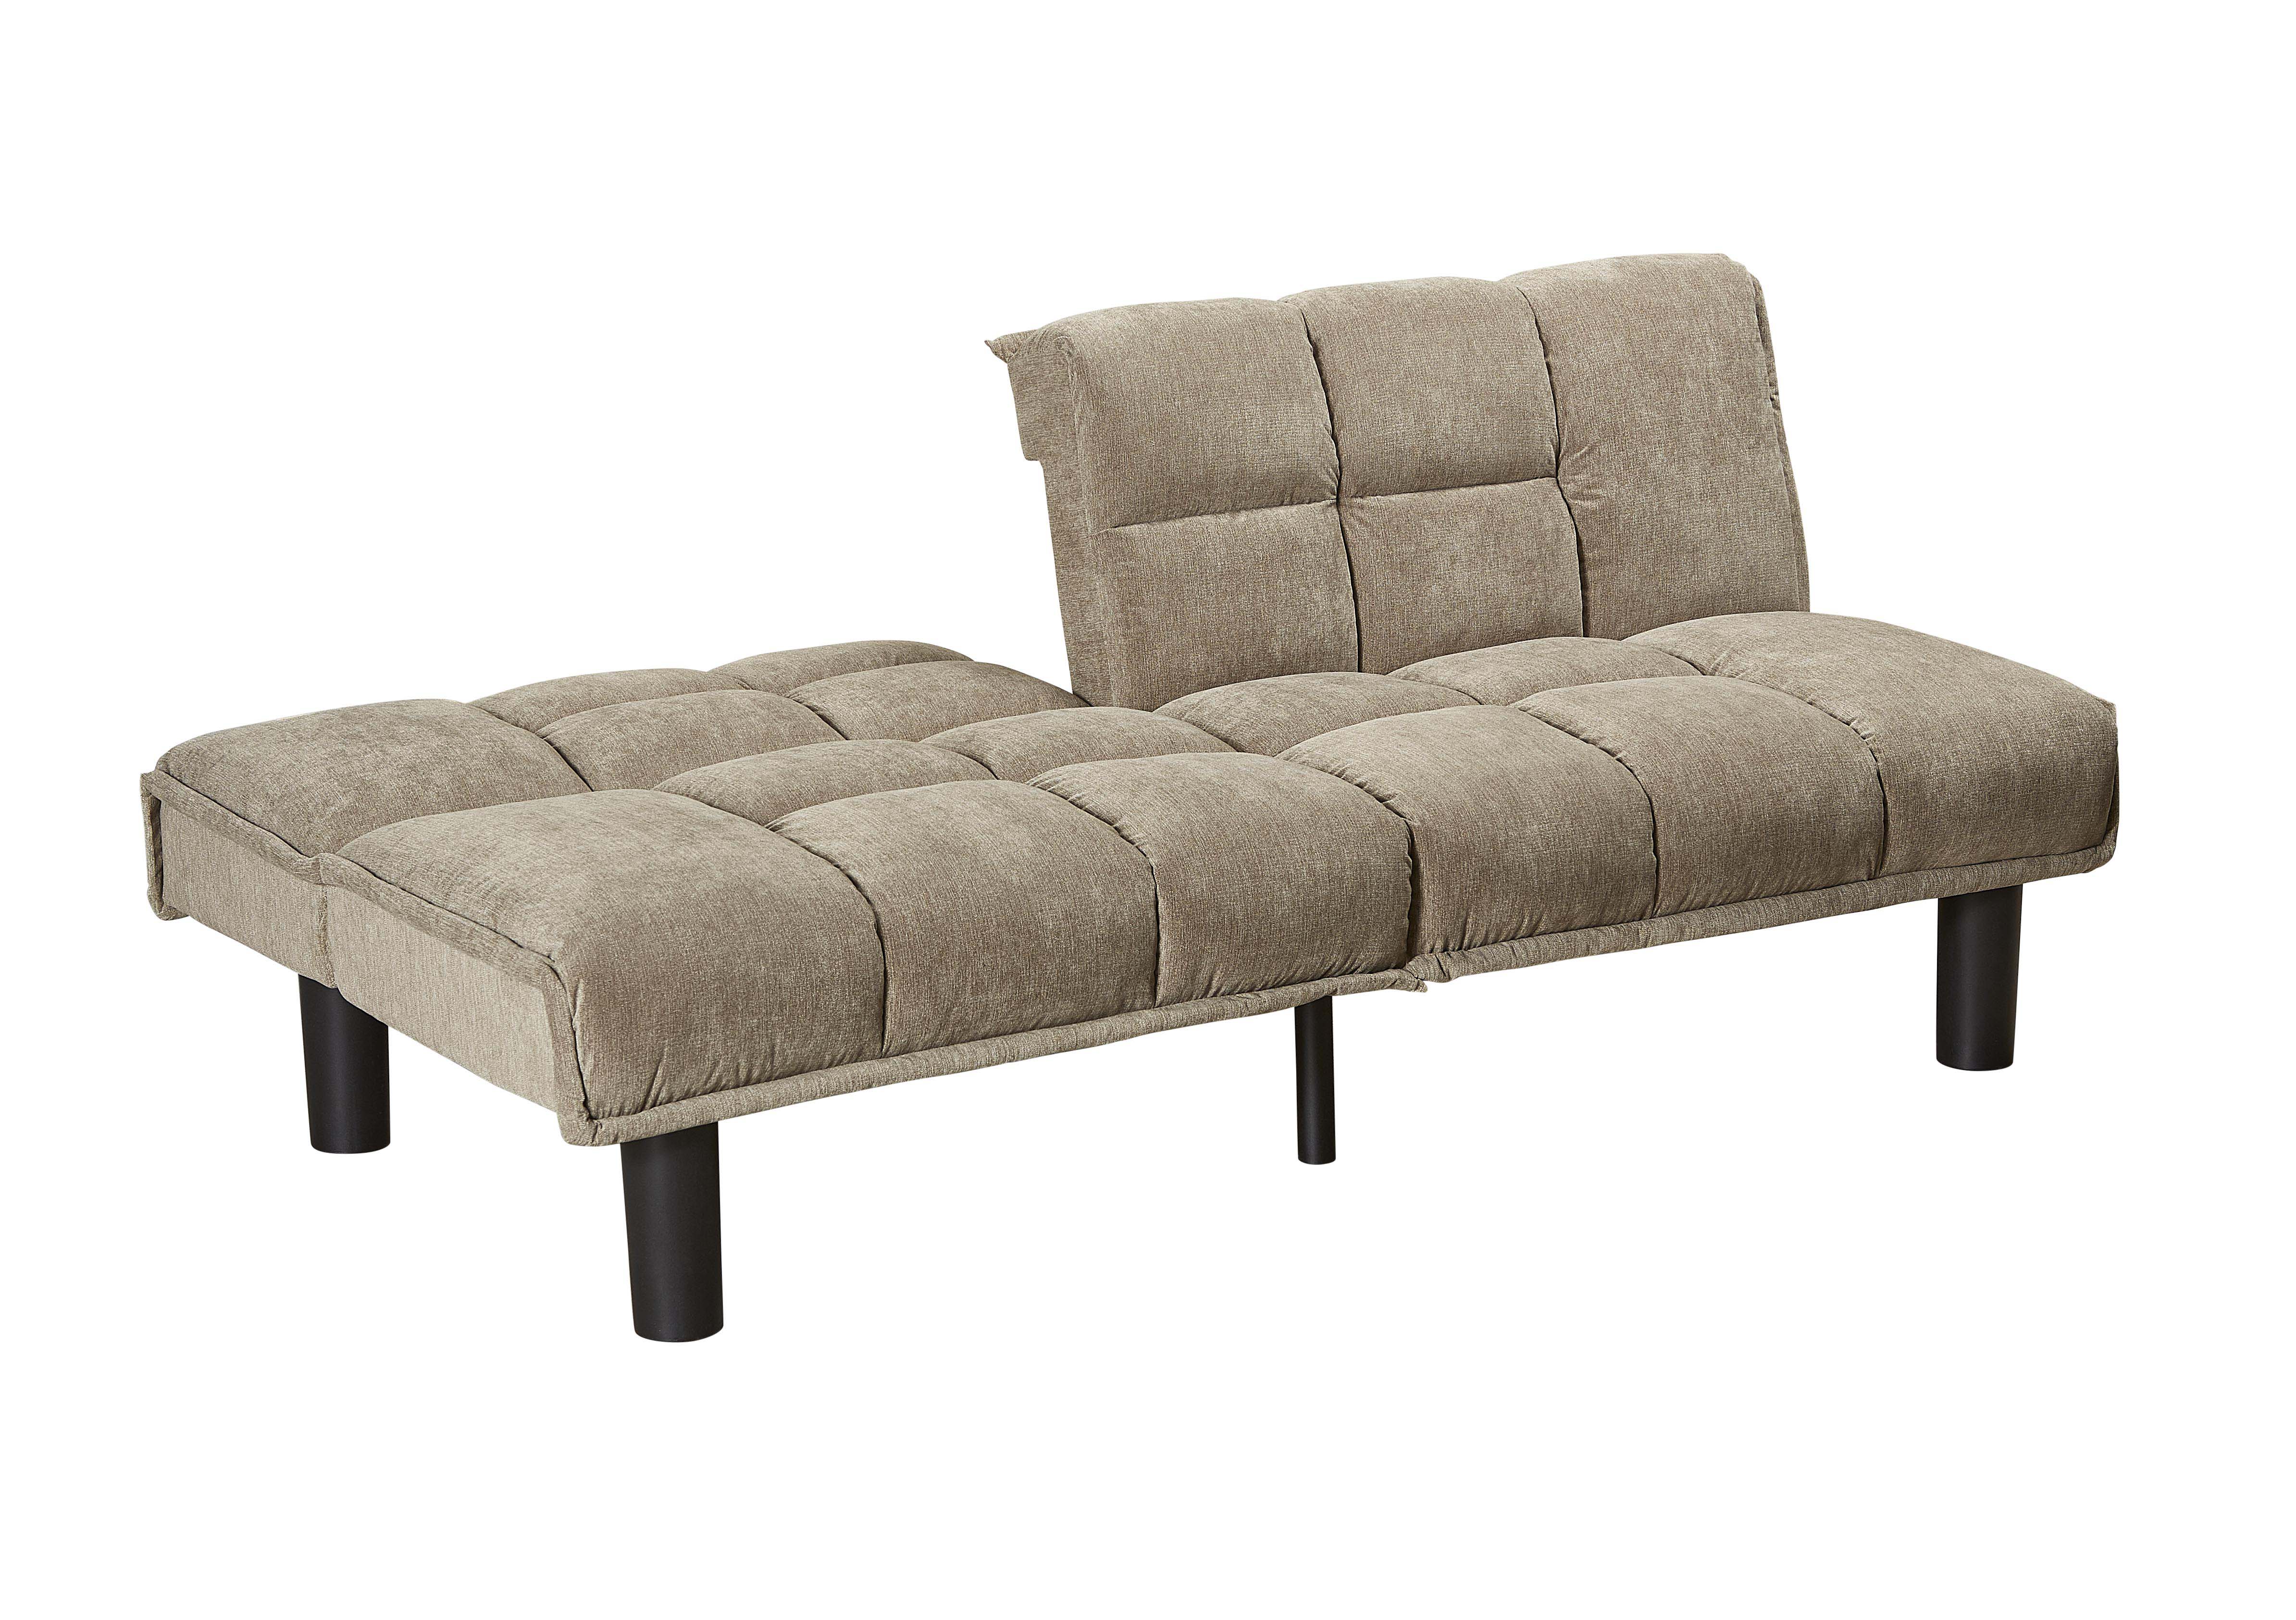 Mainstays Tufted Microfiber Futon, Tan Faux Suede - image 3 of 5